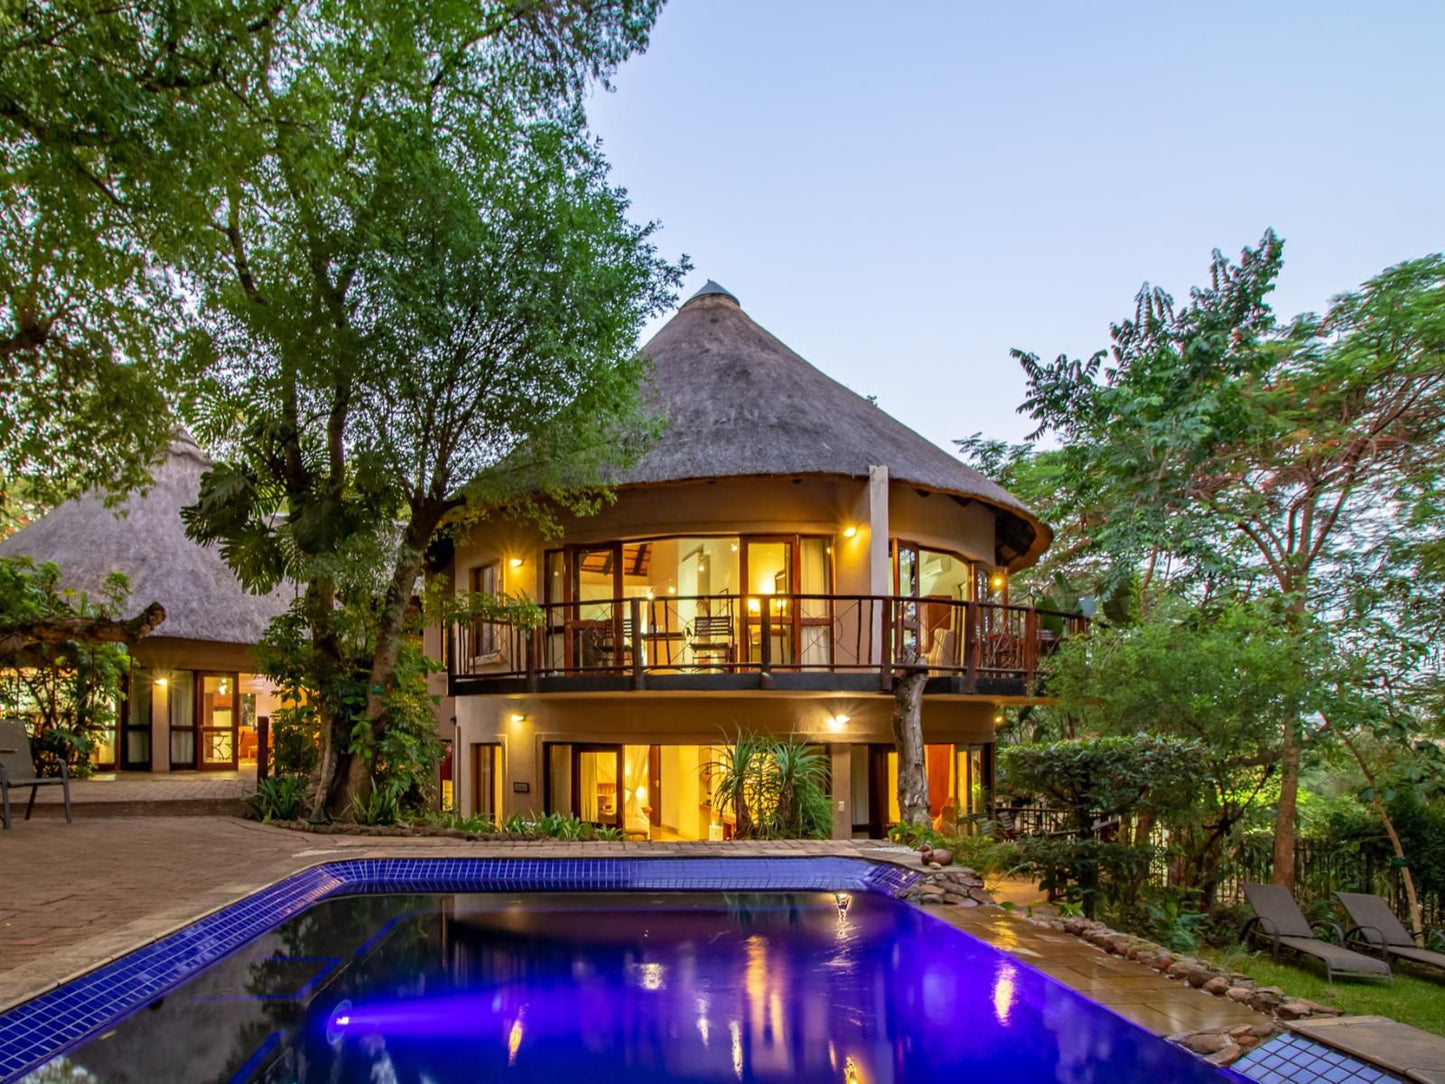 Blue Jay Lodge Hazyview Mpumalanga South Africa Complementary Colors, House, Building, Architecture, Swimming Pool